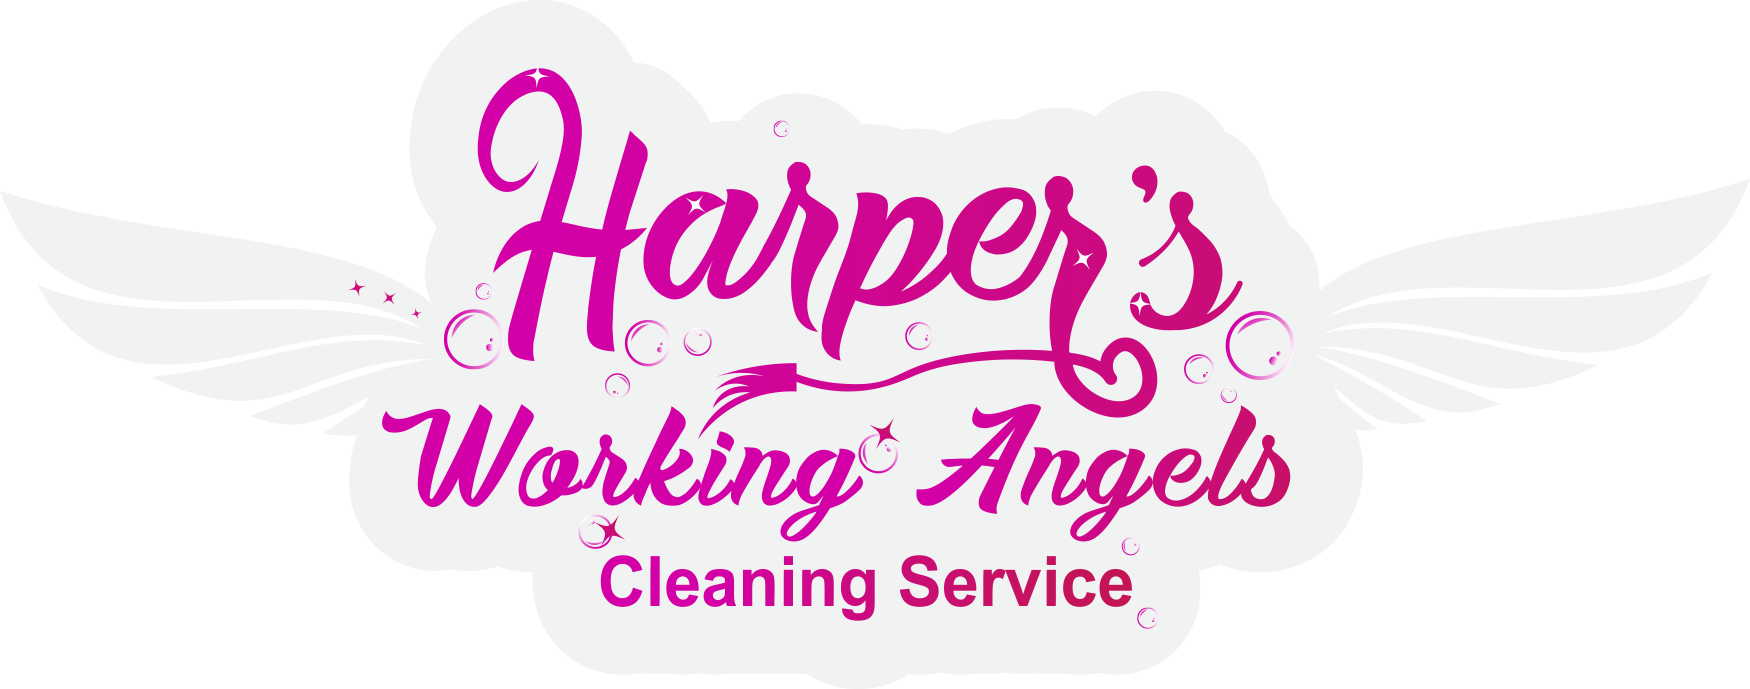 Harper's Working Angels Cleaning Service